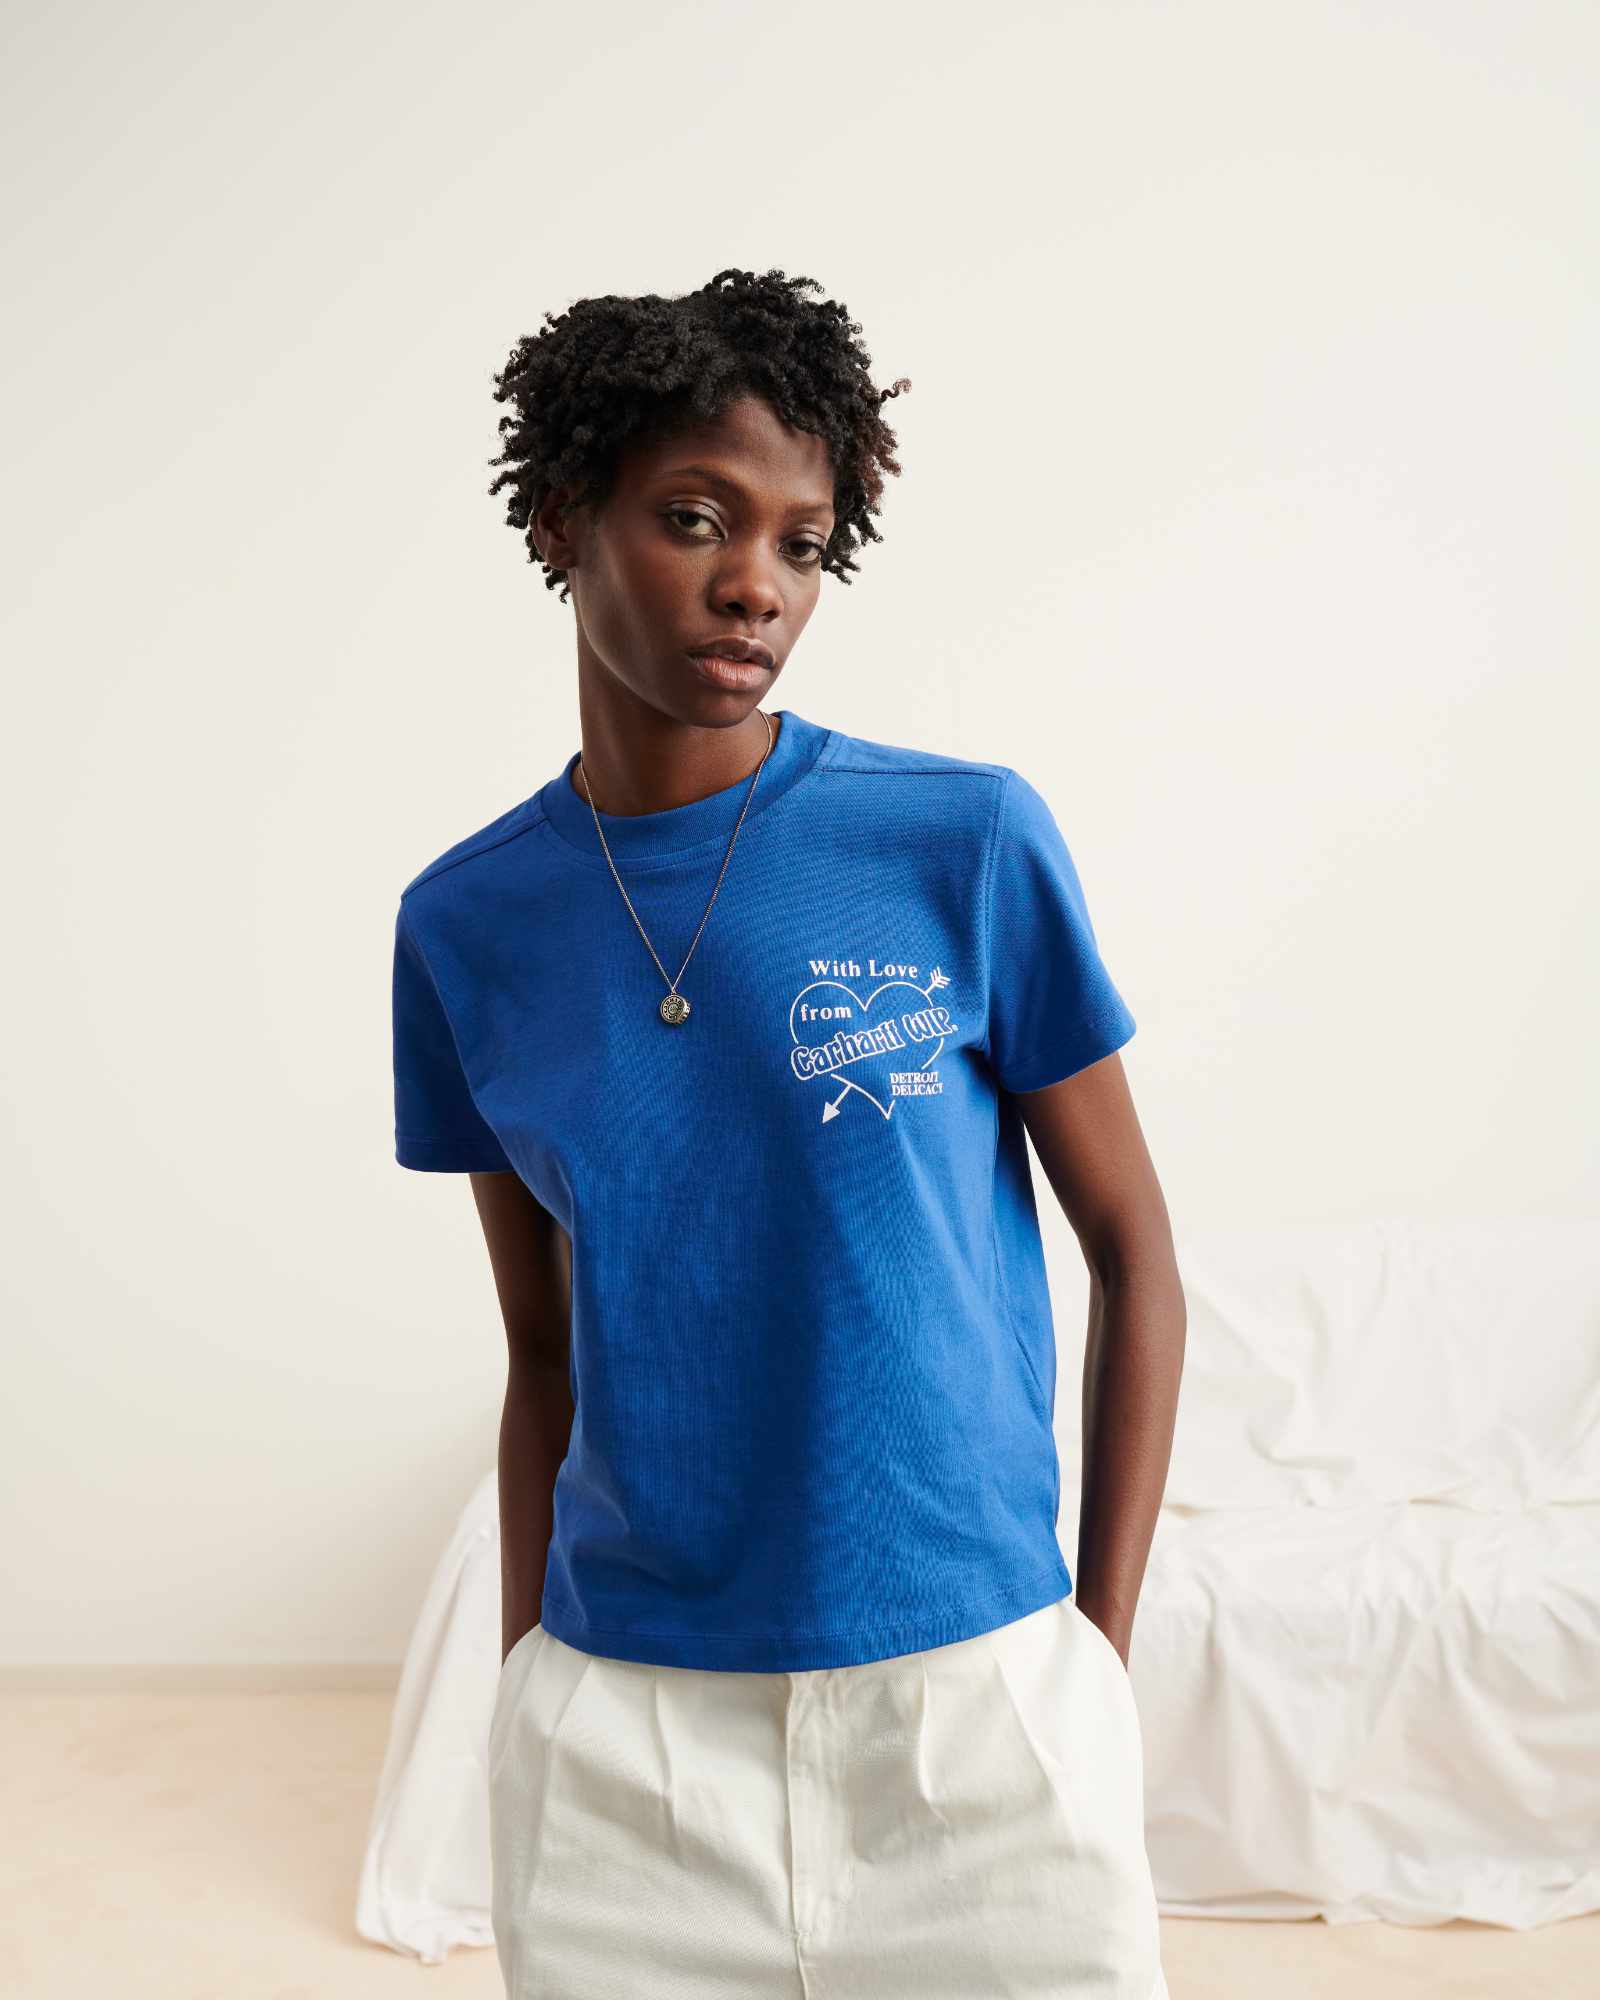 models wear carhartt wip's spring/summer 2024 collection